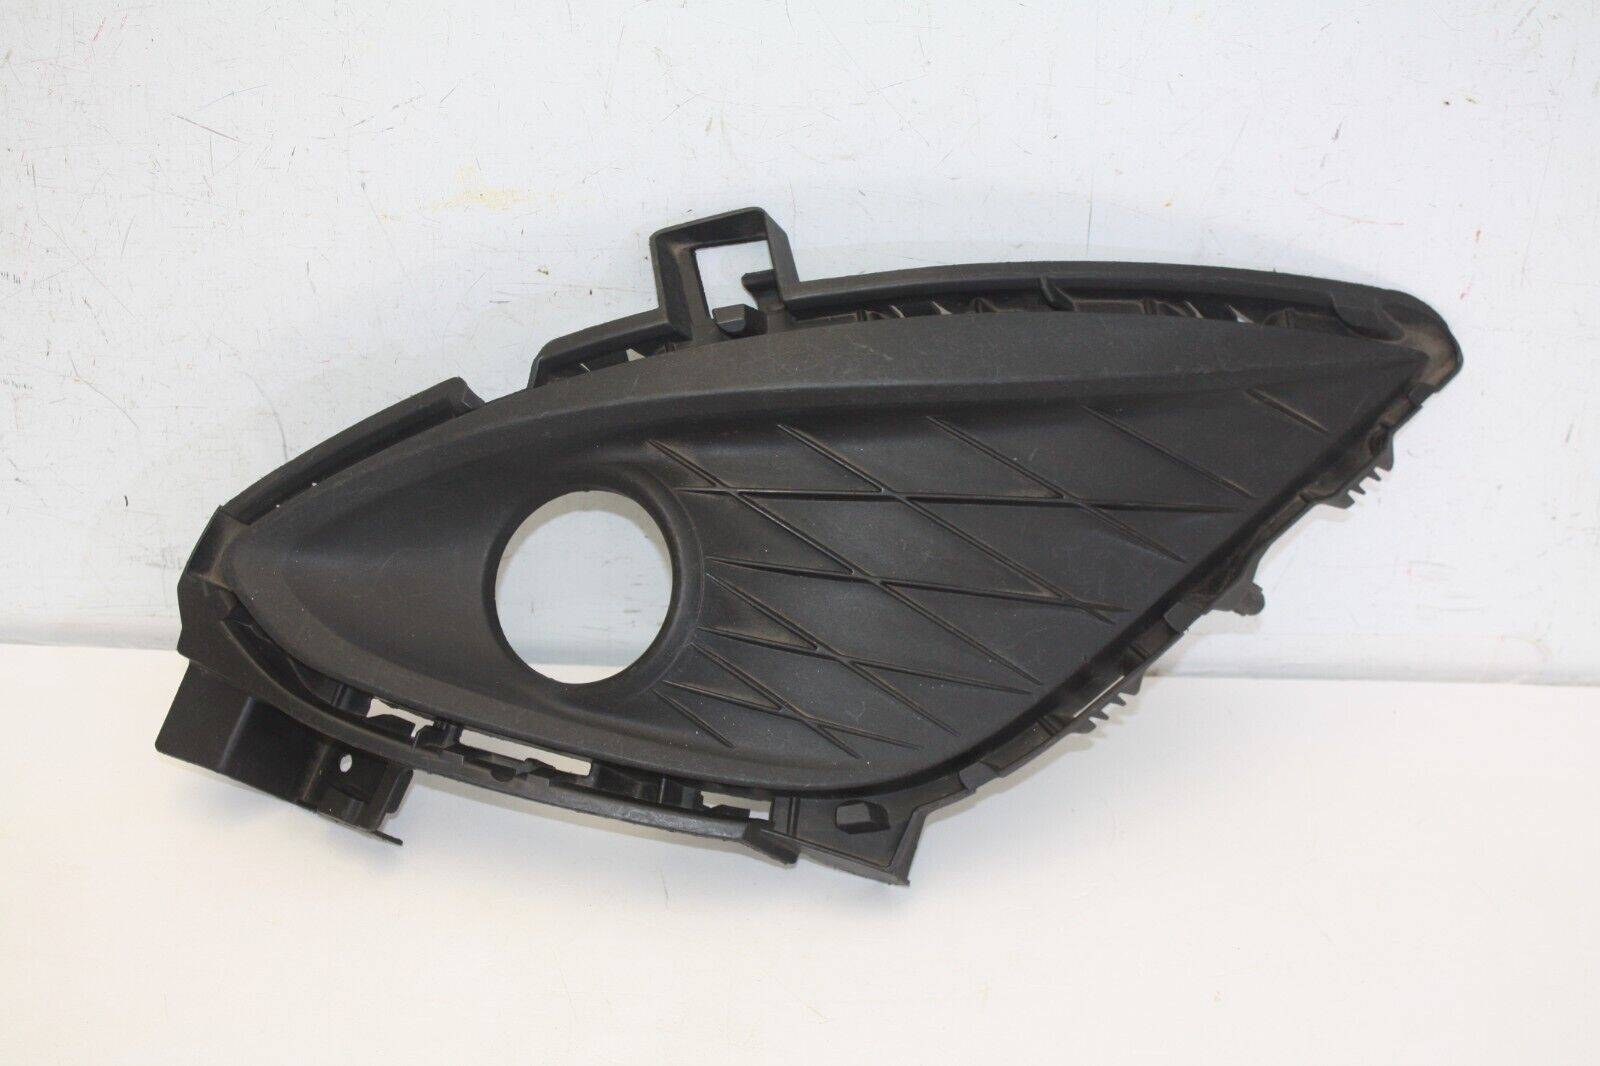 Mazda-5-Front-Bumper-Left-Side-Lower-Grill-2010-TO-2015-C513-50C21-Genuine-176241201496